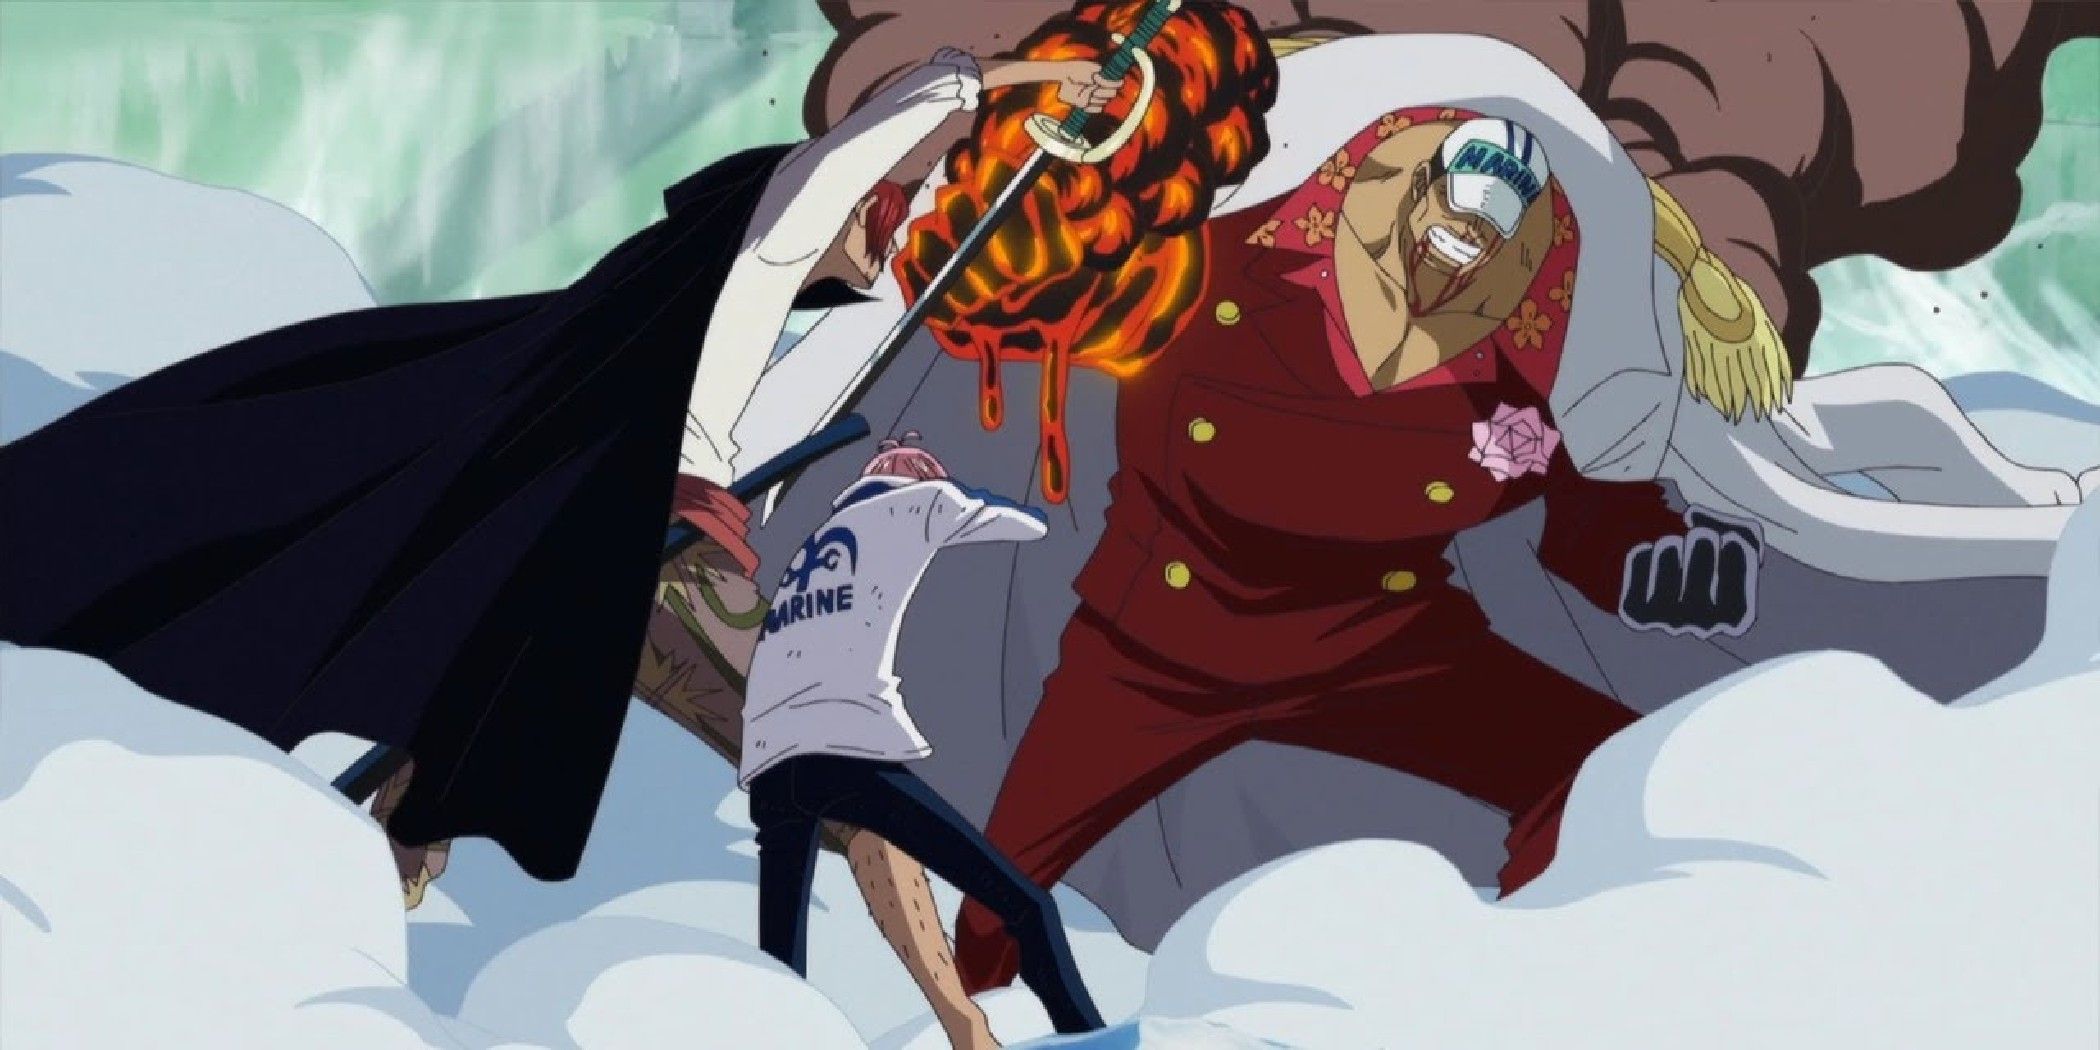 Shanks stops Akainu from attacking Koby in One Piece